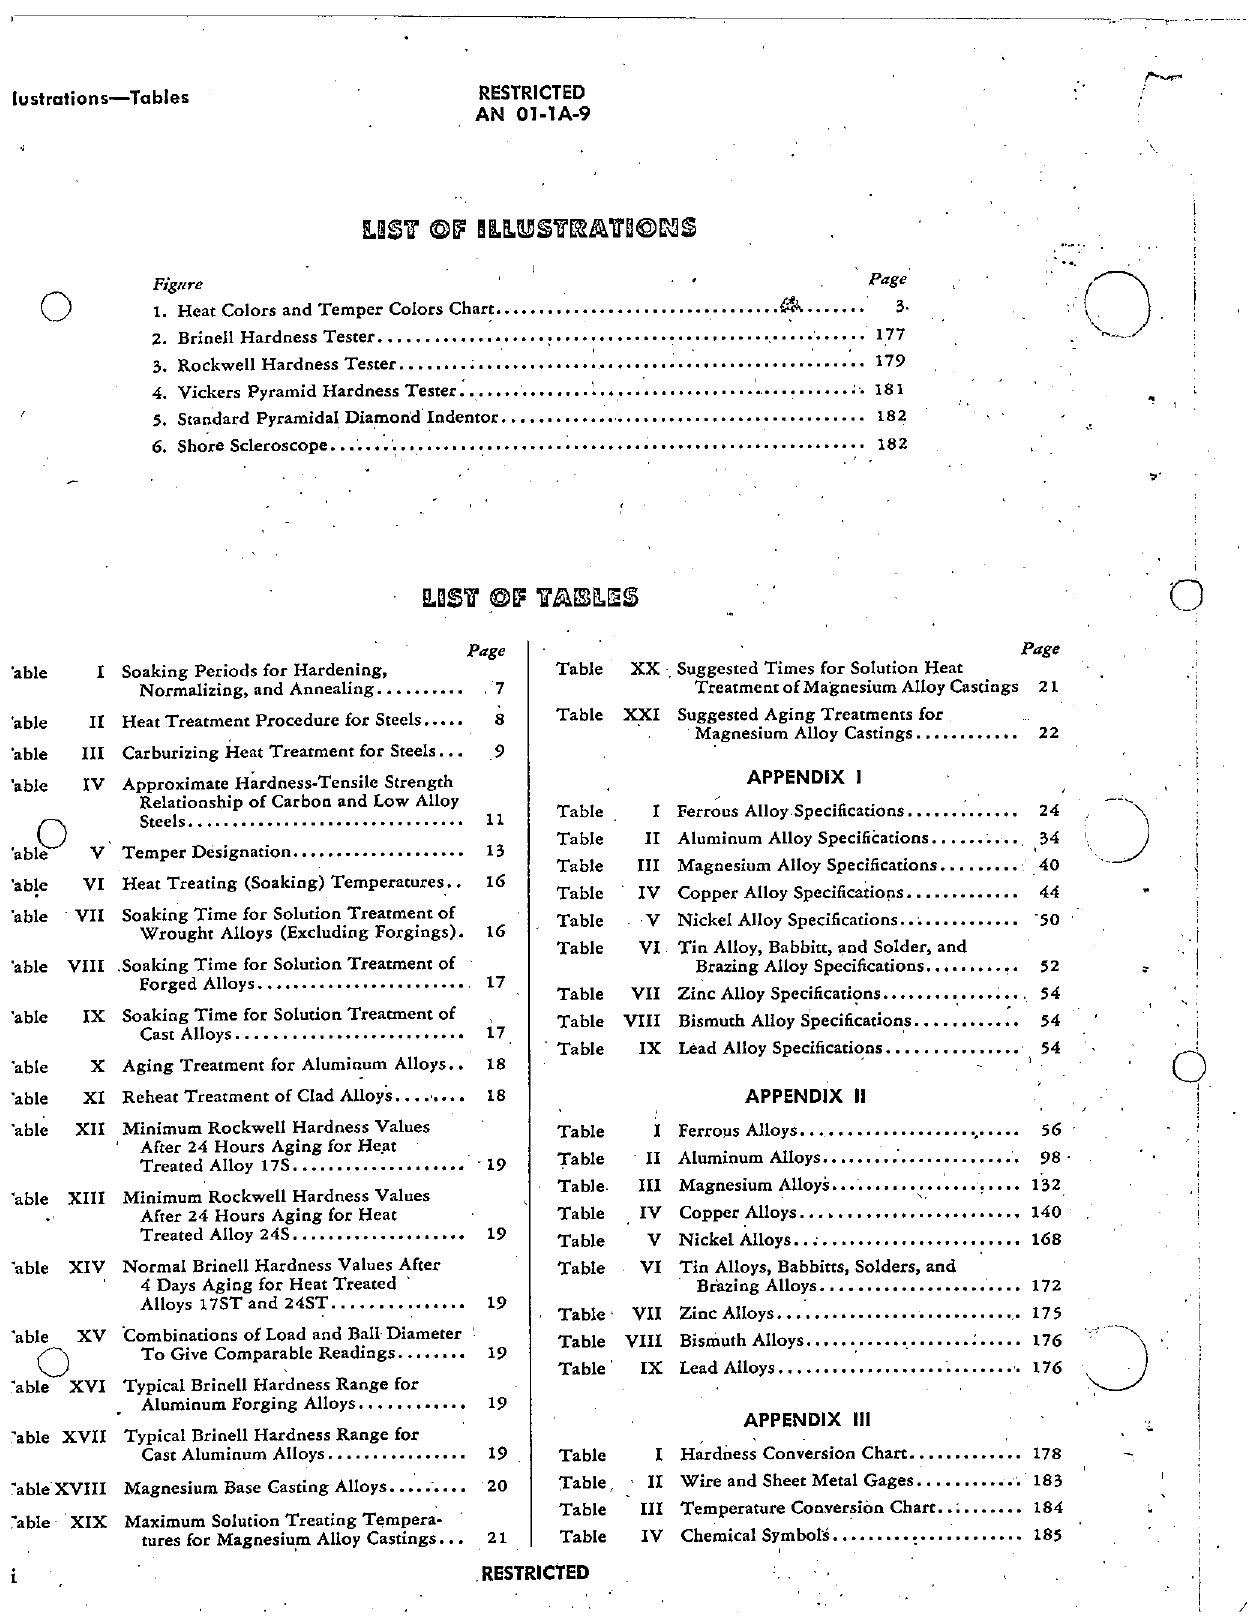 Sample page 4 from AirCorps Library document: United States and British Commonwealth of Nations Aircraft Metals